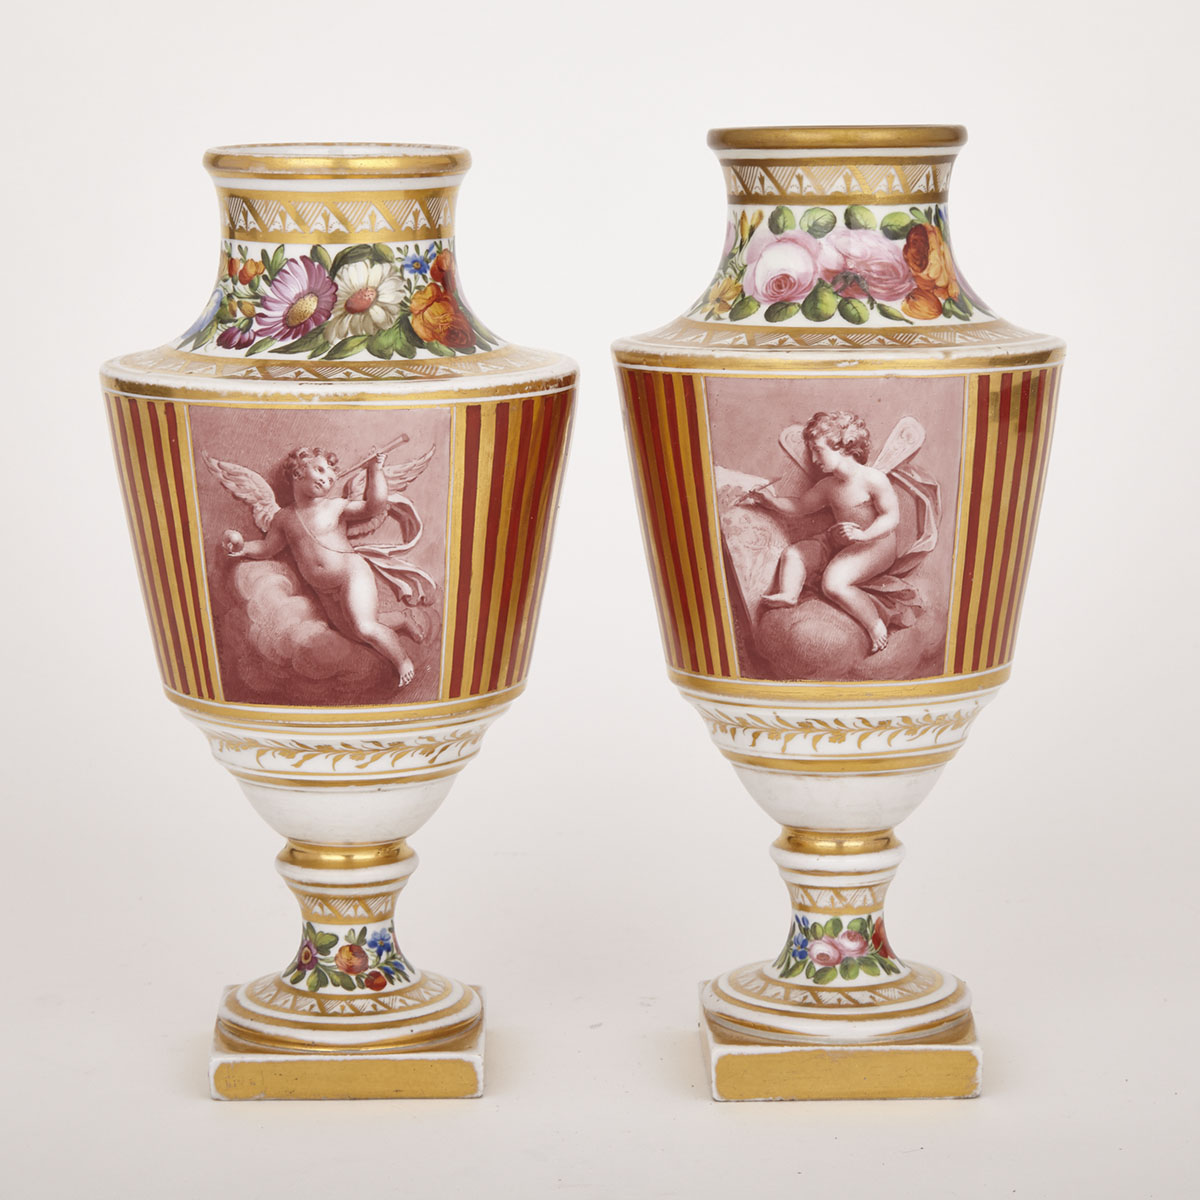 Pair of Coalport Vases, decorated by Thomas Baxter, dated 1802